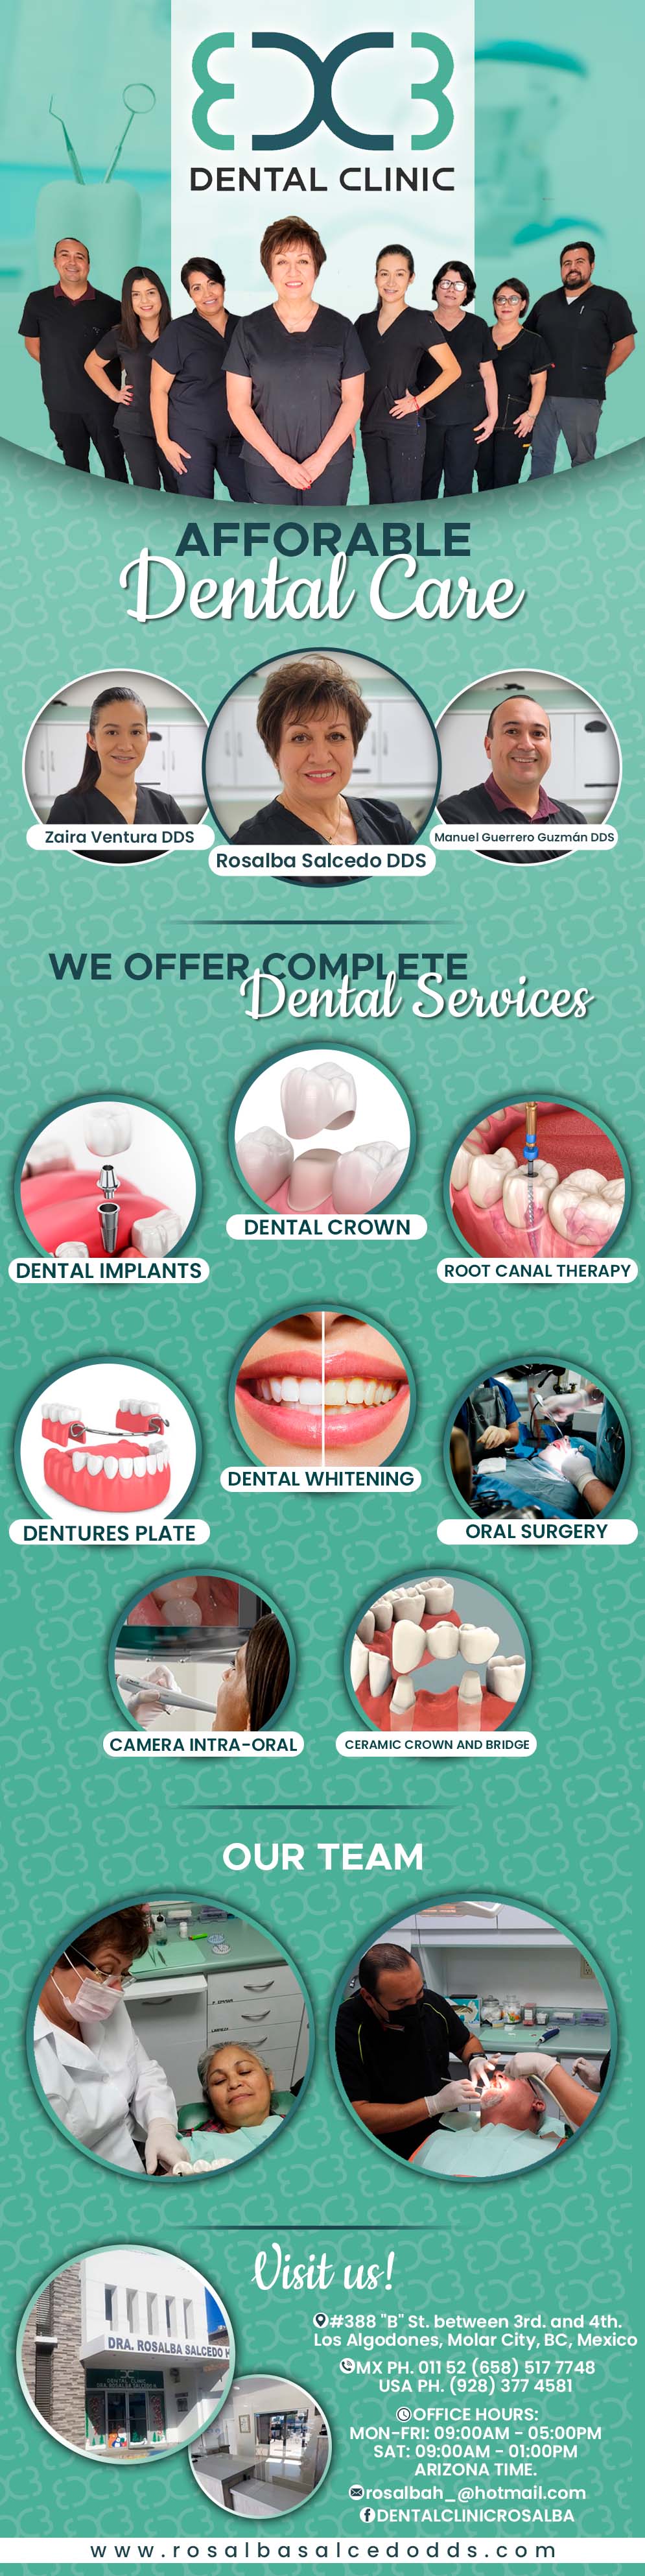 Dental Clinic Dra. Rosalba Salcedo H. -Implants  ~ Cosmetic Dentistry
General Dentistry  Surgery  X-Rays
Over 20 years Experience
Excellent Patient Referrals
Welcome to Our New Office
Consultation With or Referral to Specialists When Required
Your Dental Care Is In Good Hands
“New” Flexible Valplast Partials ~ Gold Crowns
Porcelain Crowns ~  Root Canals ~ Fiber Posts ~ Inlays Porcelain Bridges ~ Porcelain Bridges with Gold ~ Metal Bridges Traditional Acrylic Dentures ~ Molloplast (Soft Material) Dentures General Oral Surgery ~ Onlays ~ Jackets ~ Traditional Partials  Sedation Proflex (Flexible) Dentures ~ Prescriptions 
~ Relines (Hard / Soft)
  Fluoride Treatments ~ Deep Cleaning  ~ Repair to Dentures Traditional Cleaning ~ Wisdom Teeth Extraction ~ Porcelain Fillings Immediate Upper and Lower Dentures (Alveoplasty) 
~ Laser Teeth Whitening
On Site Dental Lab ~ Autoclave Sterilization ~ Digital X-Rays
        